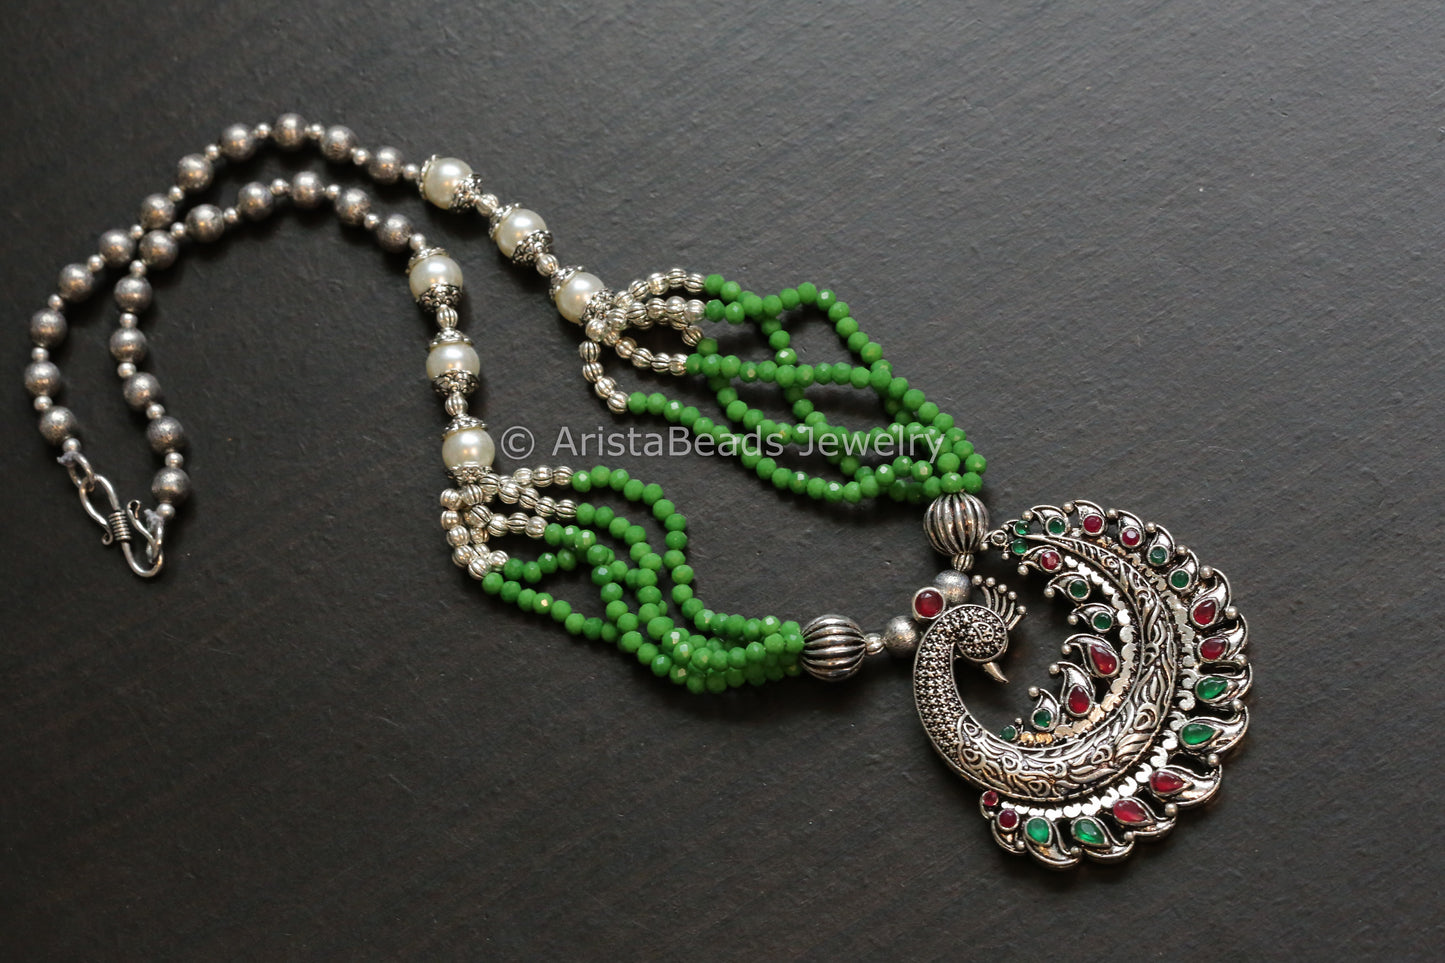 Peacock Oxidized Necklace - Green Beads